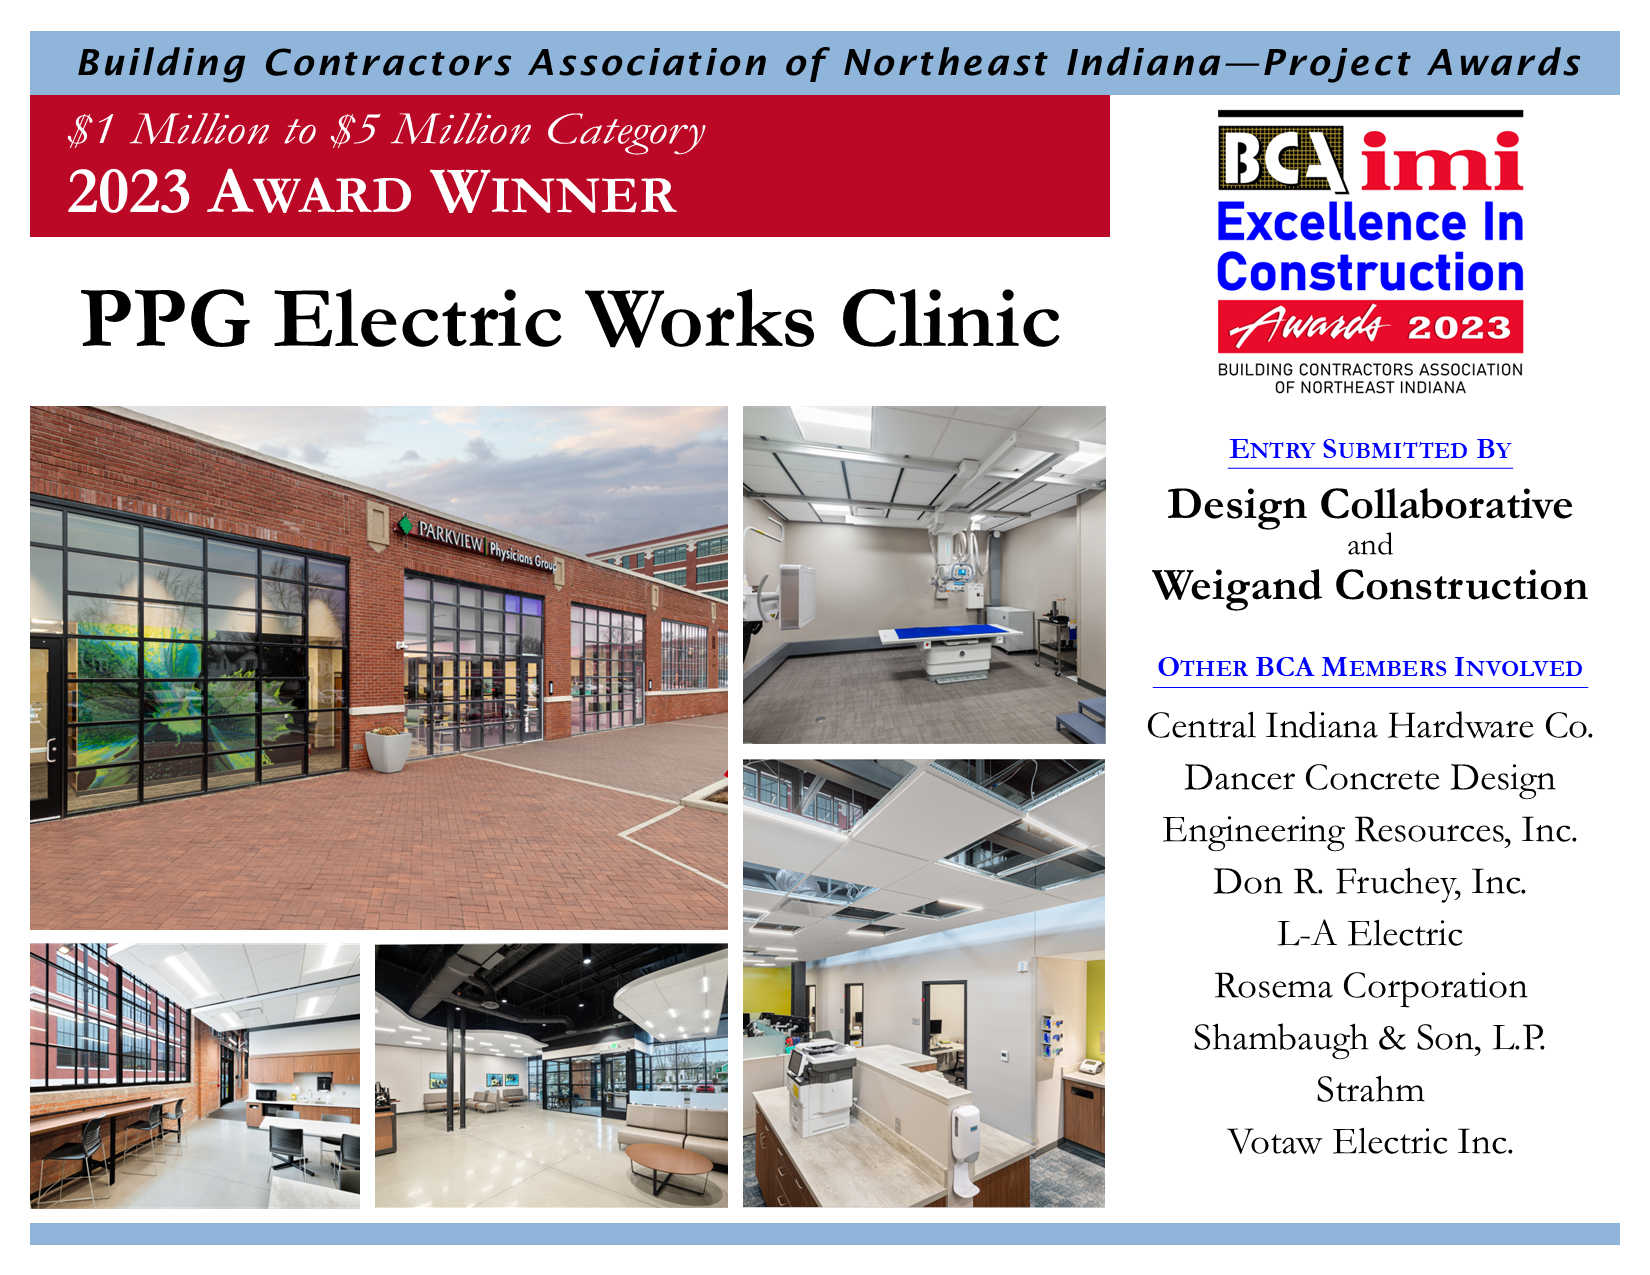 PPG Electric Works Clinic